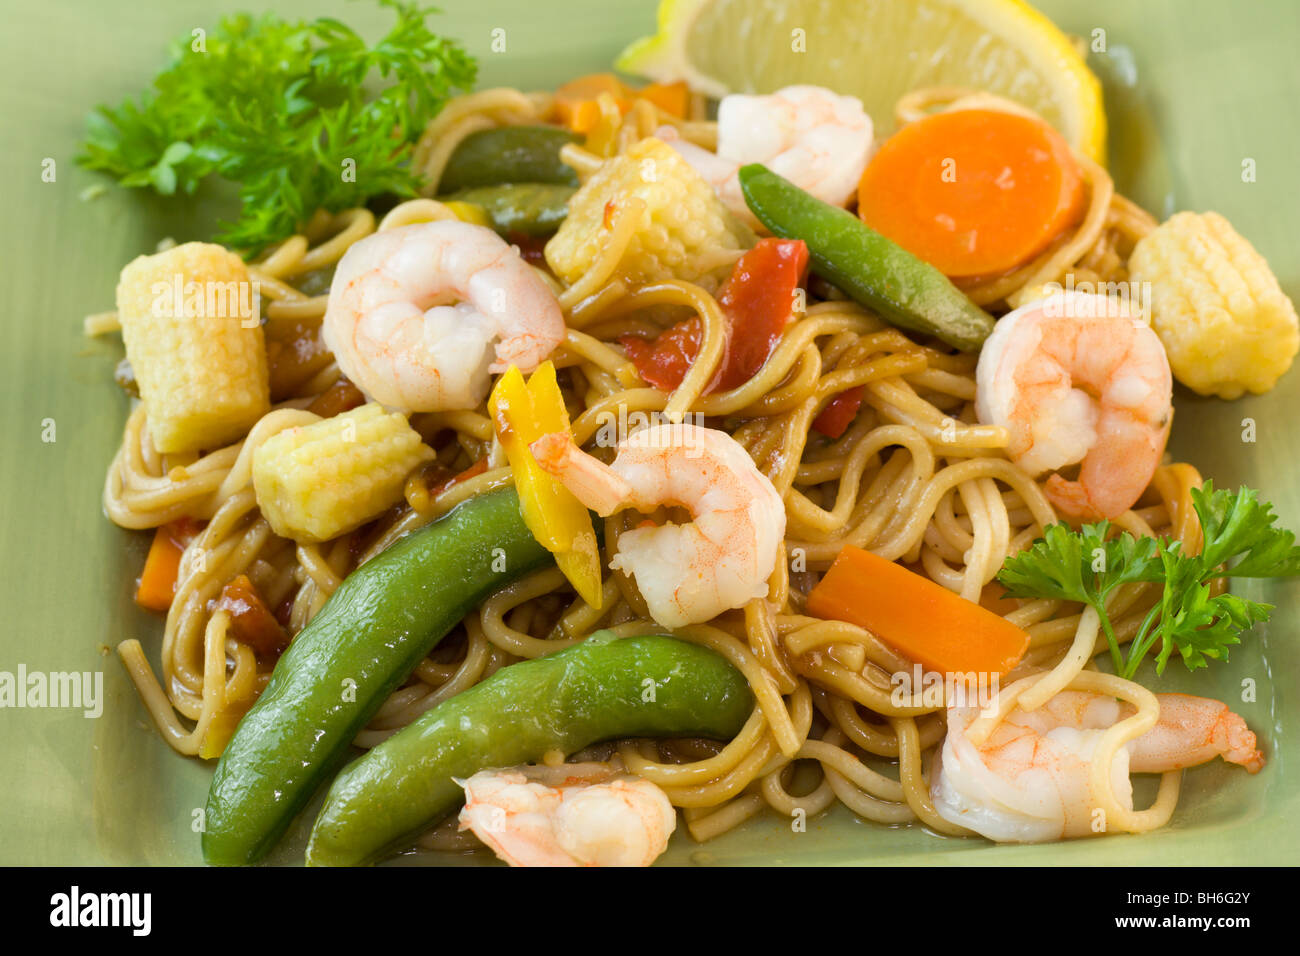 shrimp with stir fry noodles, baby corn, and green snap peas Stock Photo